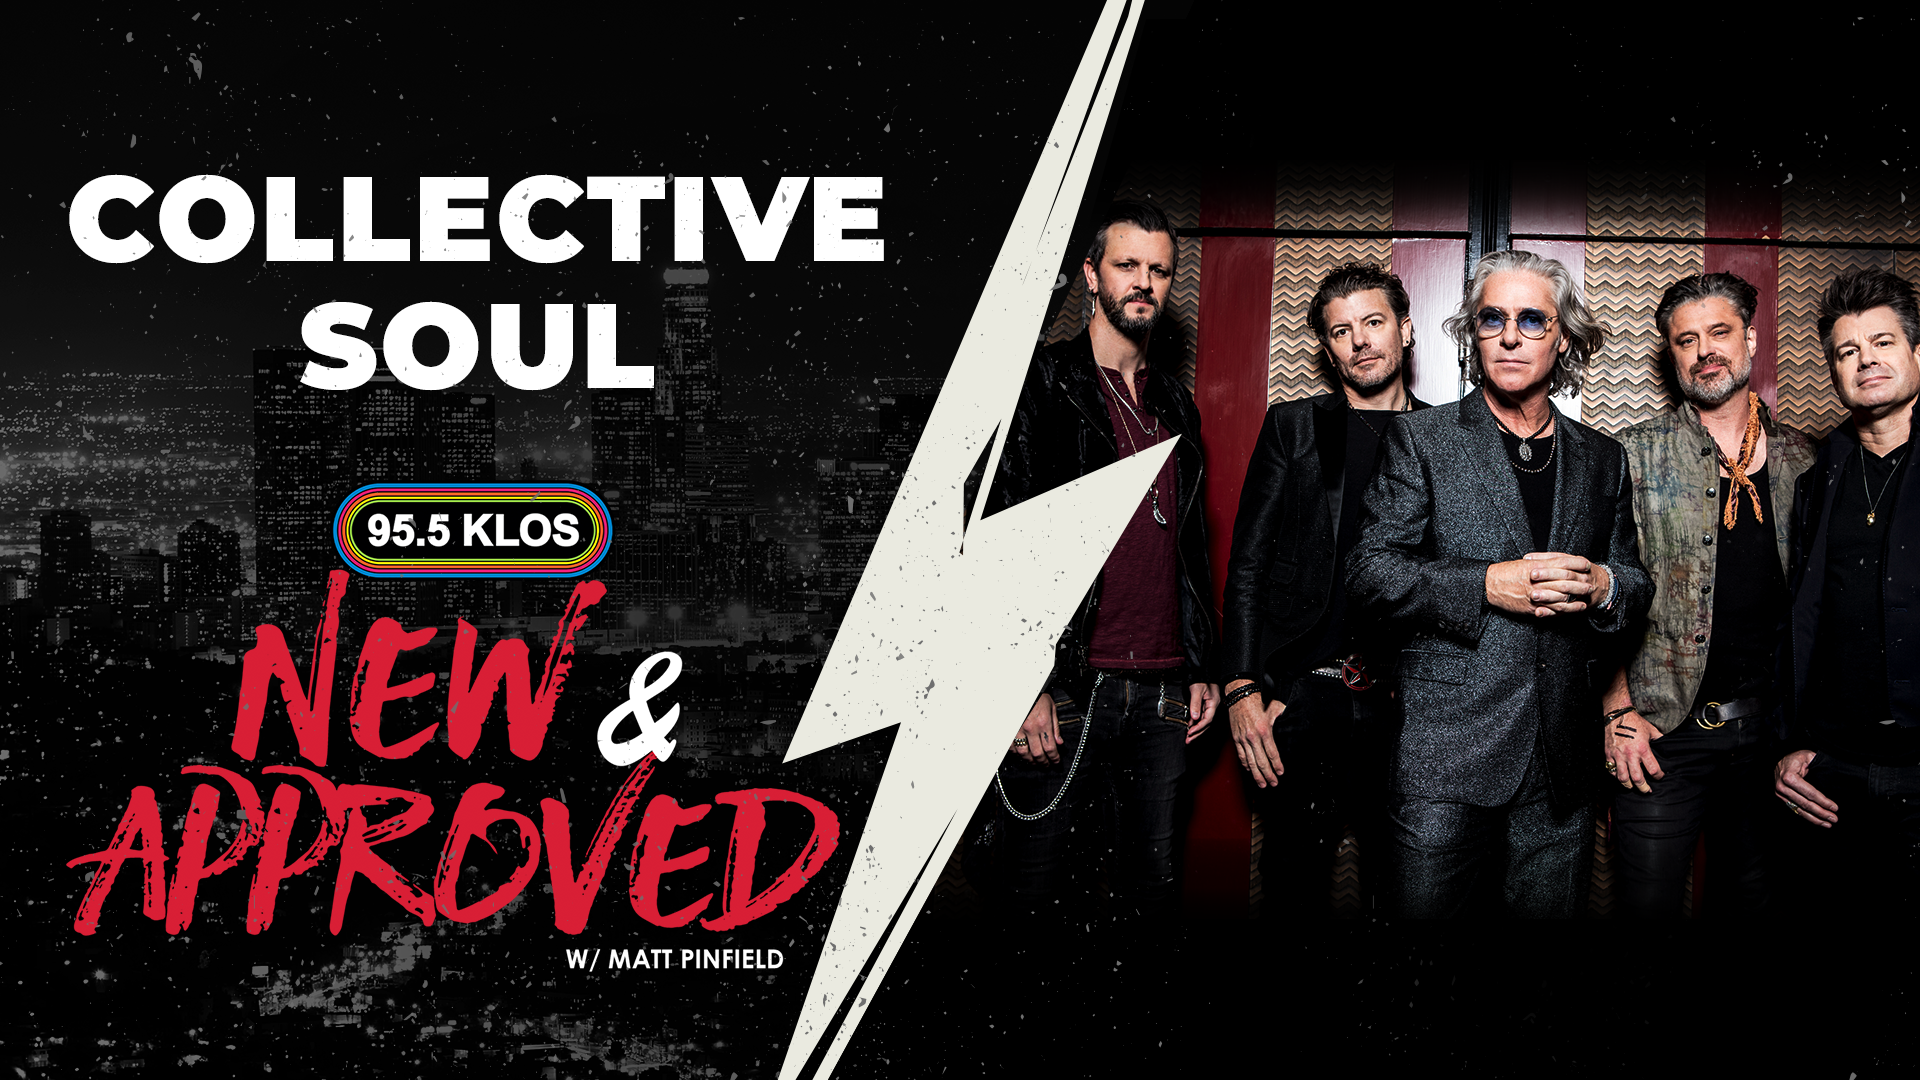 Collective Soul Discusses Upcoming Album & Their Road To Success On New & Approved W/ Matt Pinfield